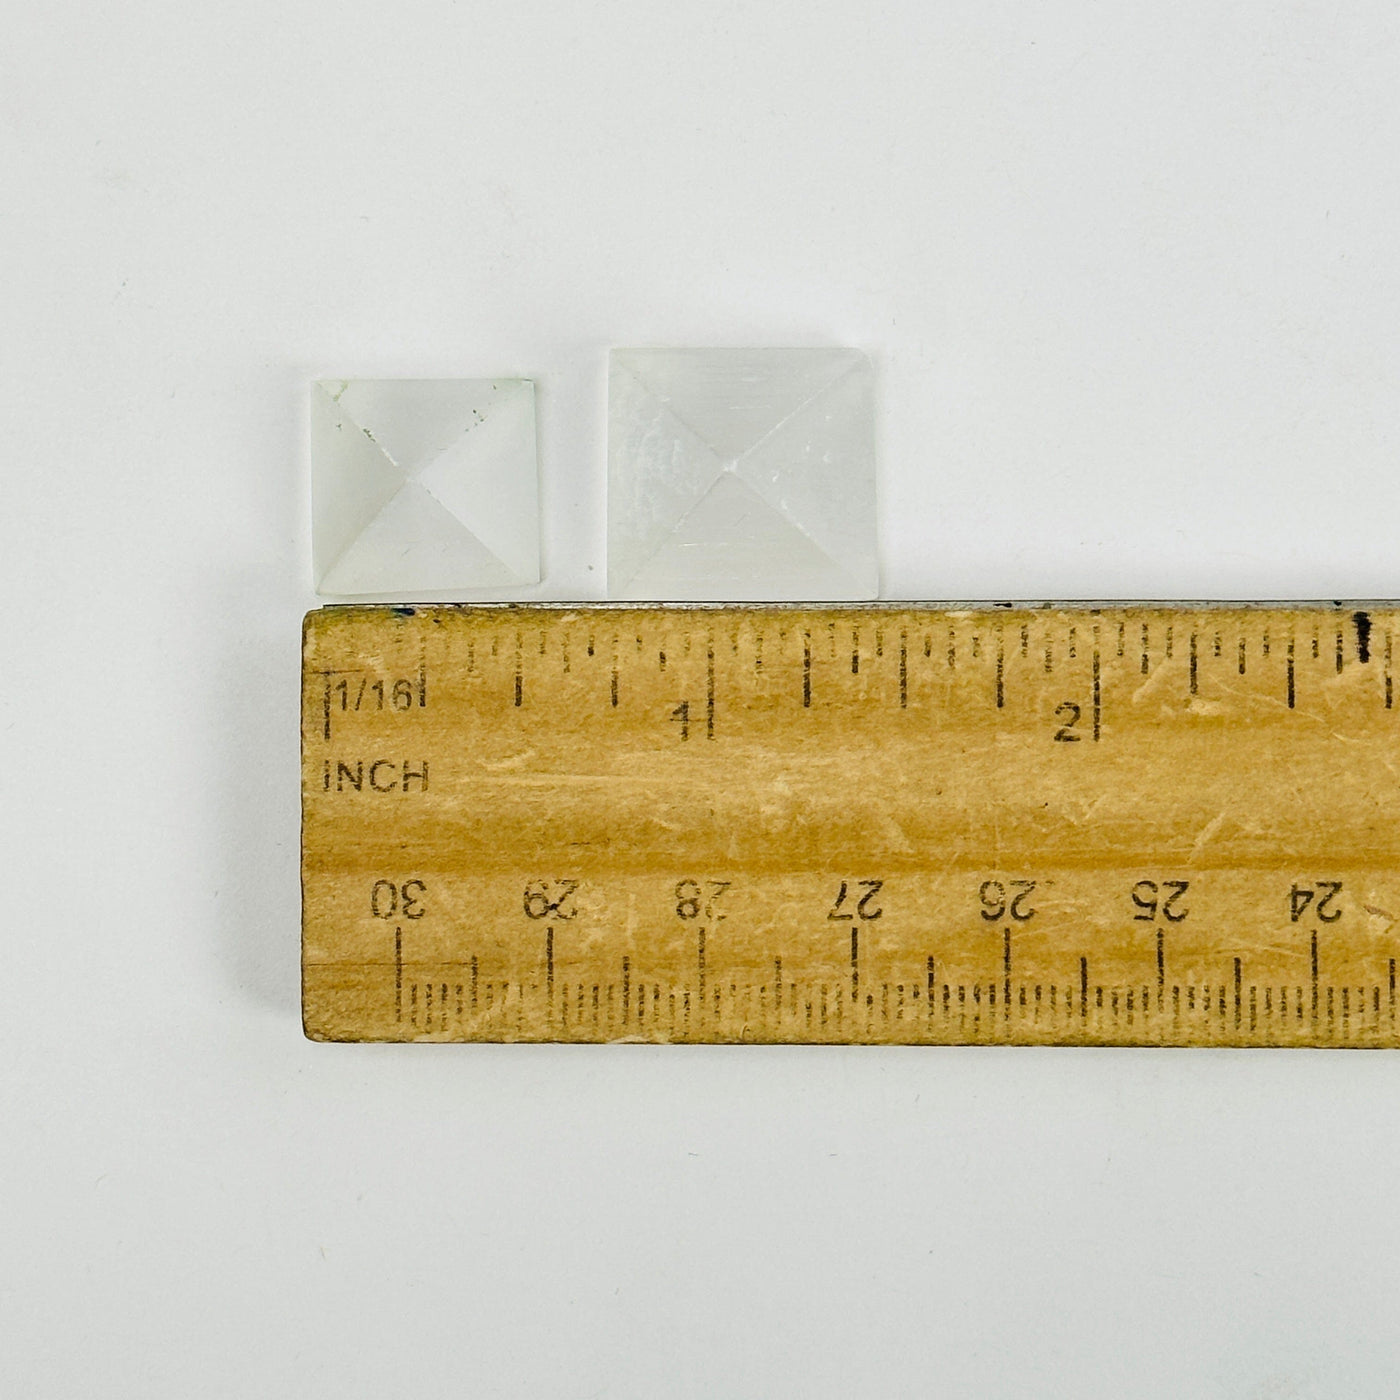 selenite pyramids next to a ruler for size reference